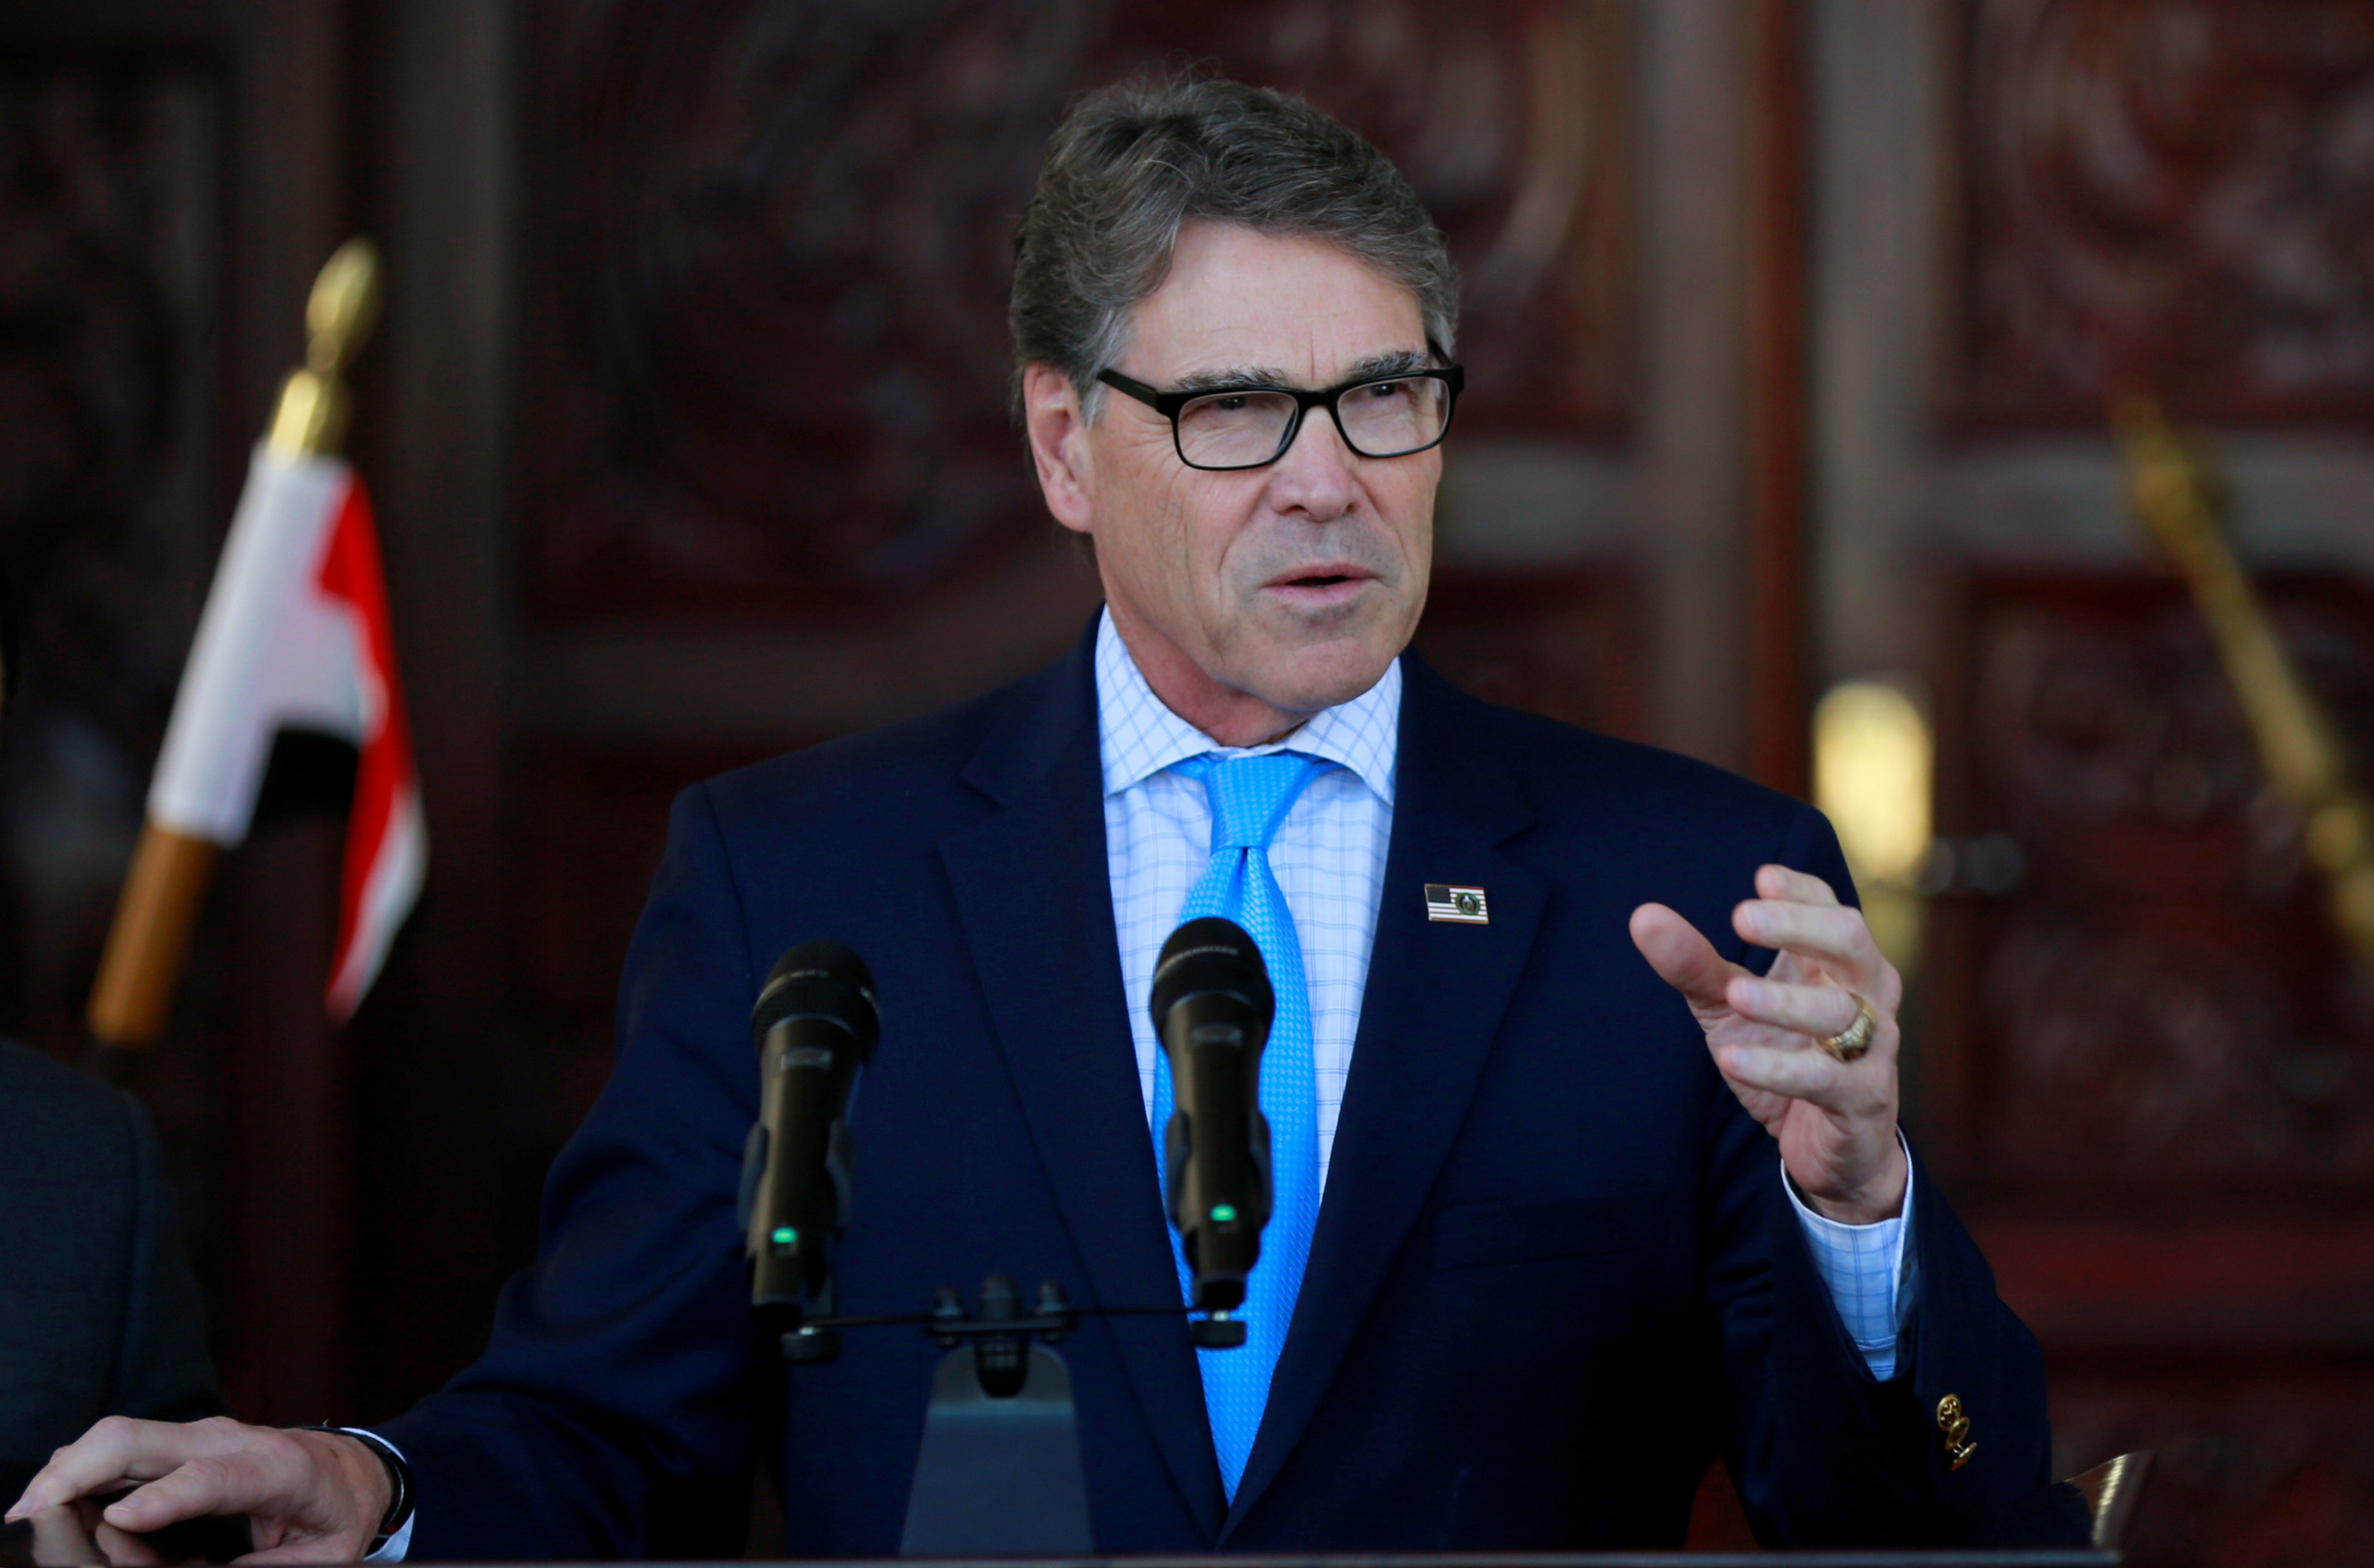 U.S. Energy Secretary Rick Perry attends a news conference after meeting with Iraqi President Barham Salih in Baghdad